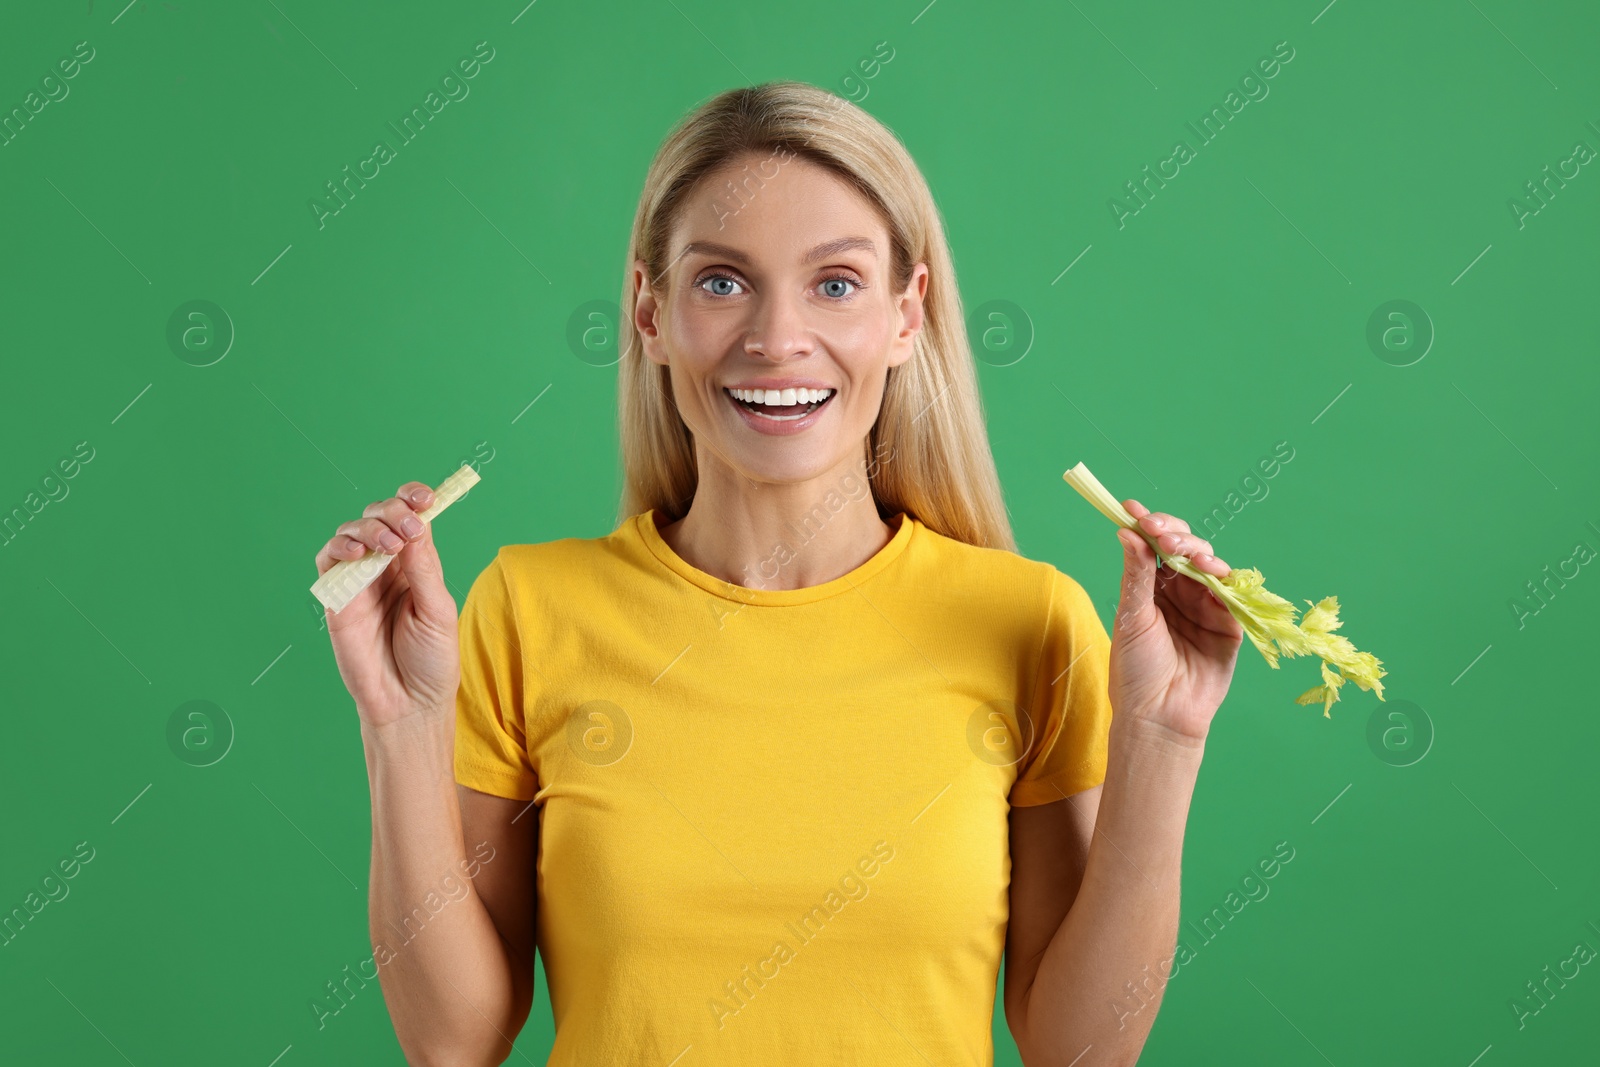 Photo of Woman with pieces of fresh celery stem on green background